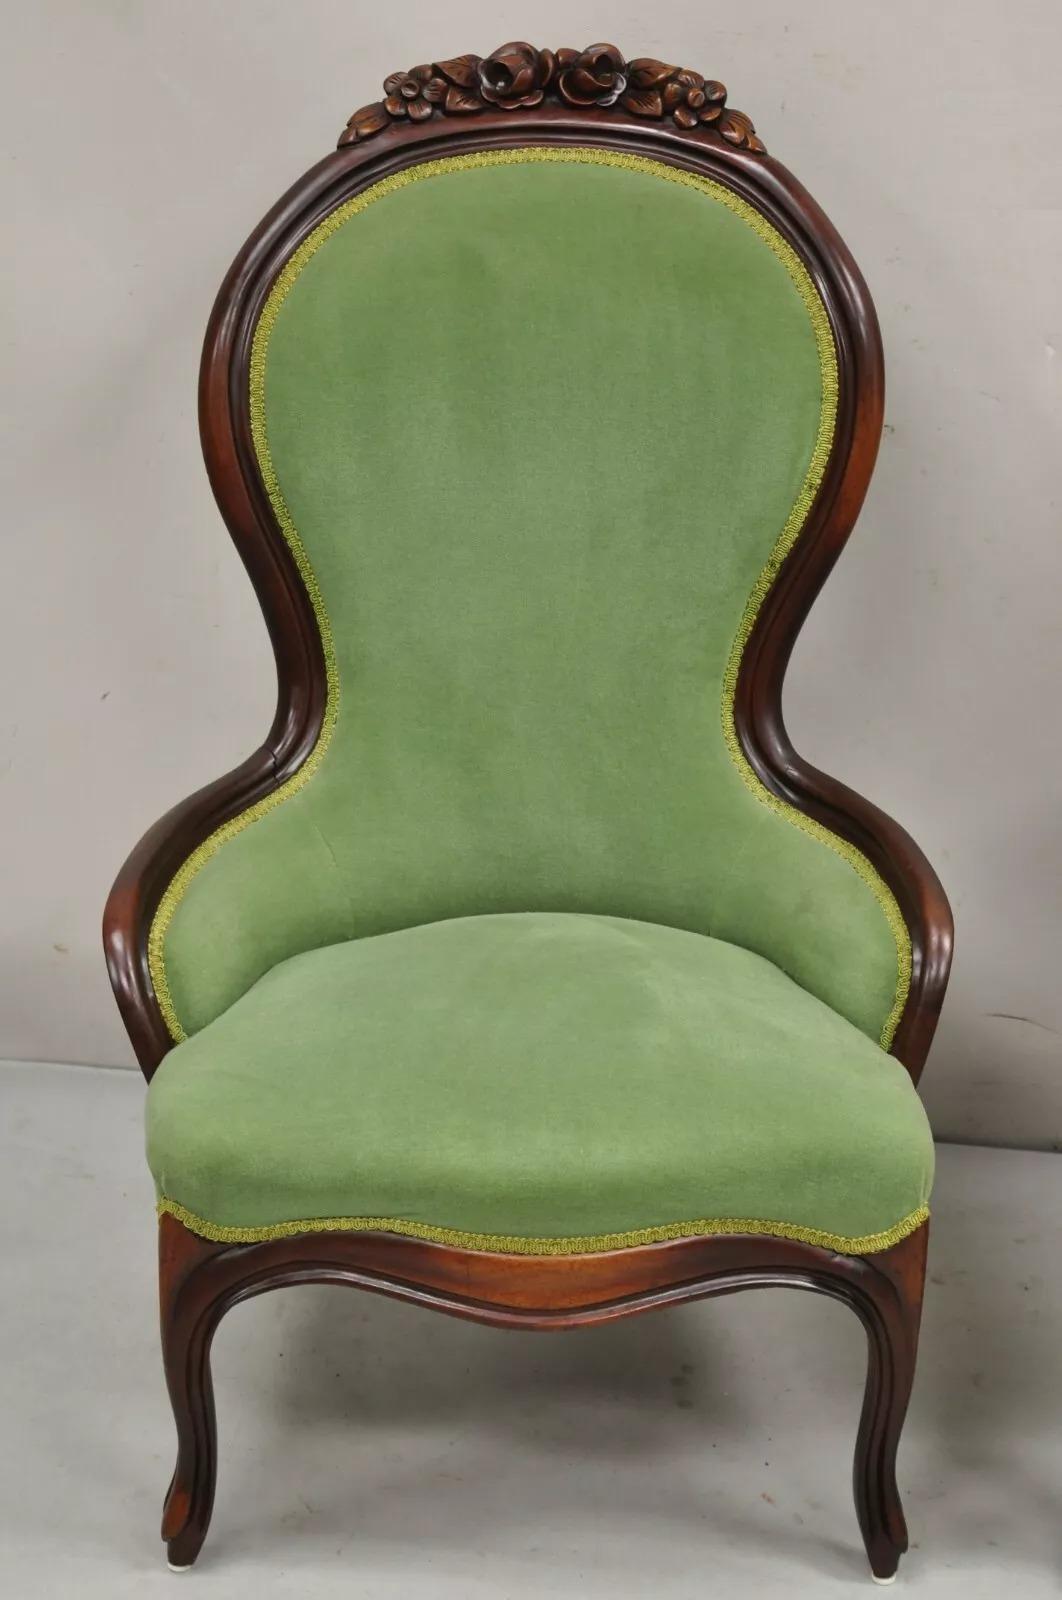 Vintage Victorian Green & Yellow His & Hers Rose Carved Parlor Chairs - a Pair In Good Condition For Sale In Philadelphia, PA